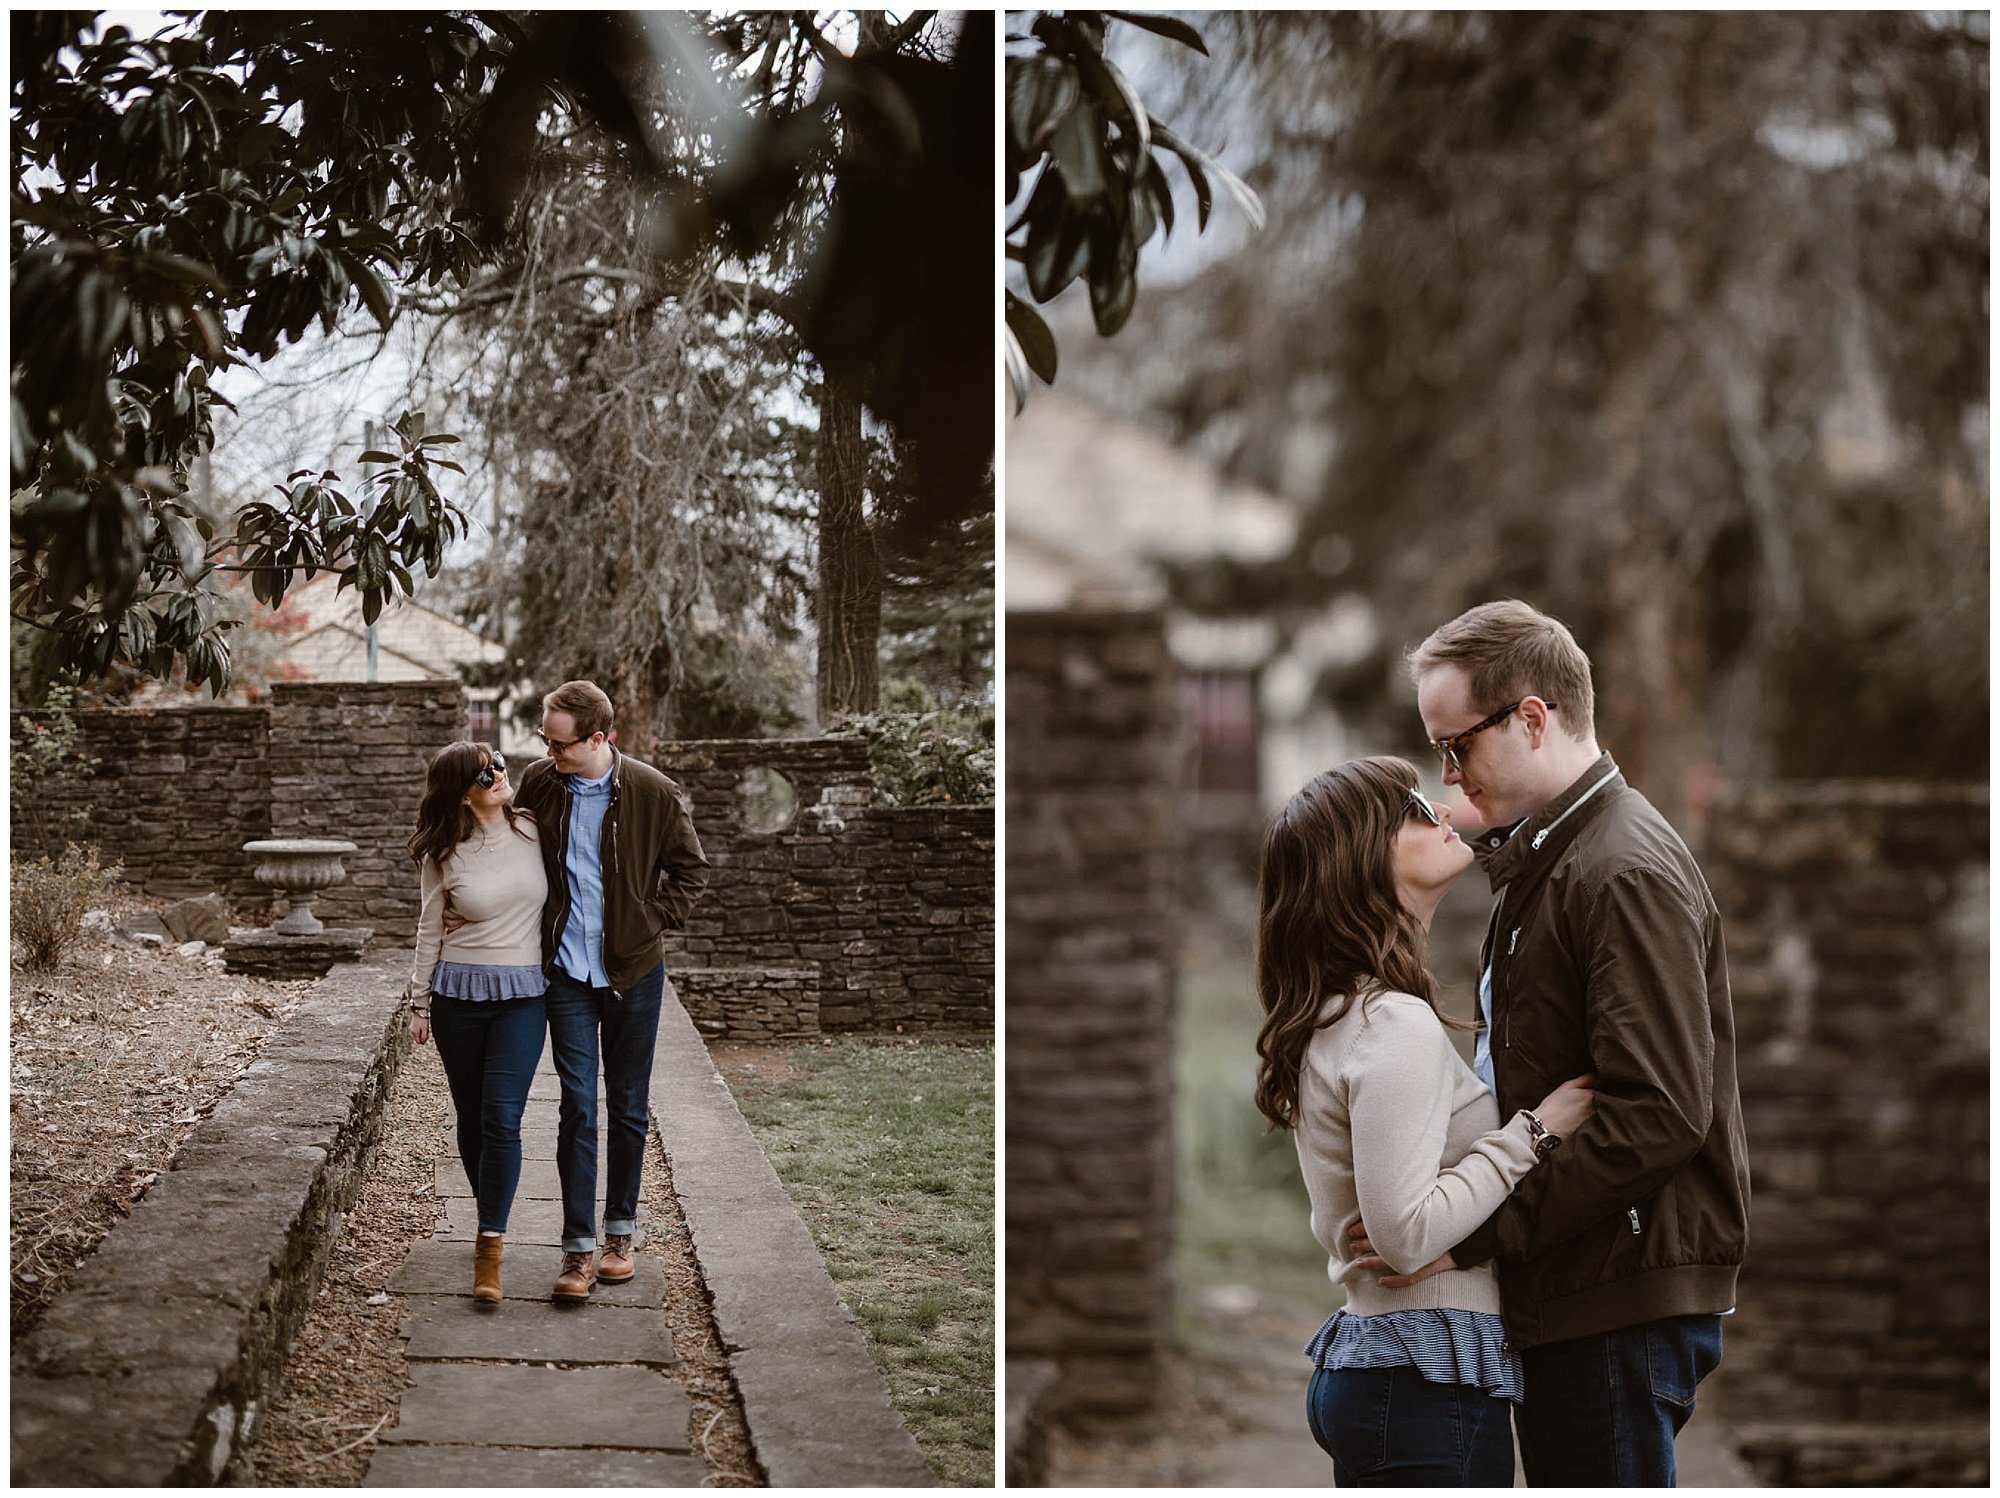 Engagement photos at the Knoxville Botanical Garden in Knoxville